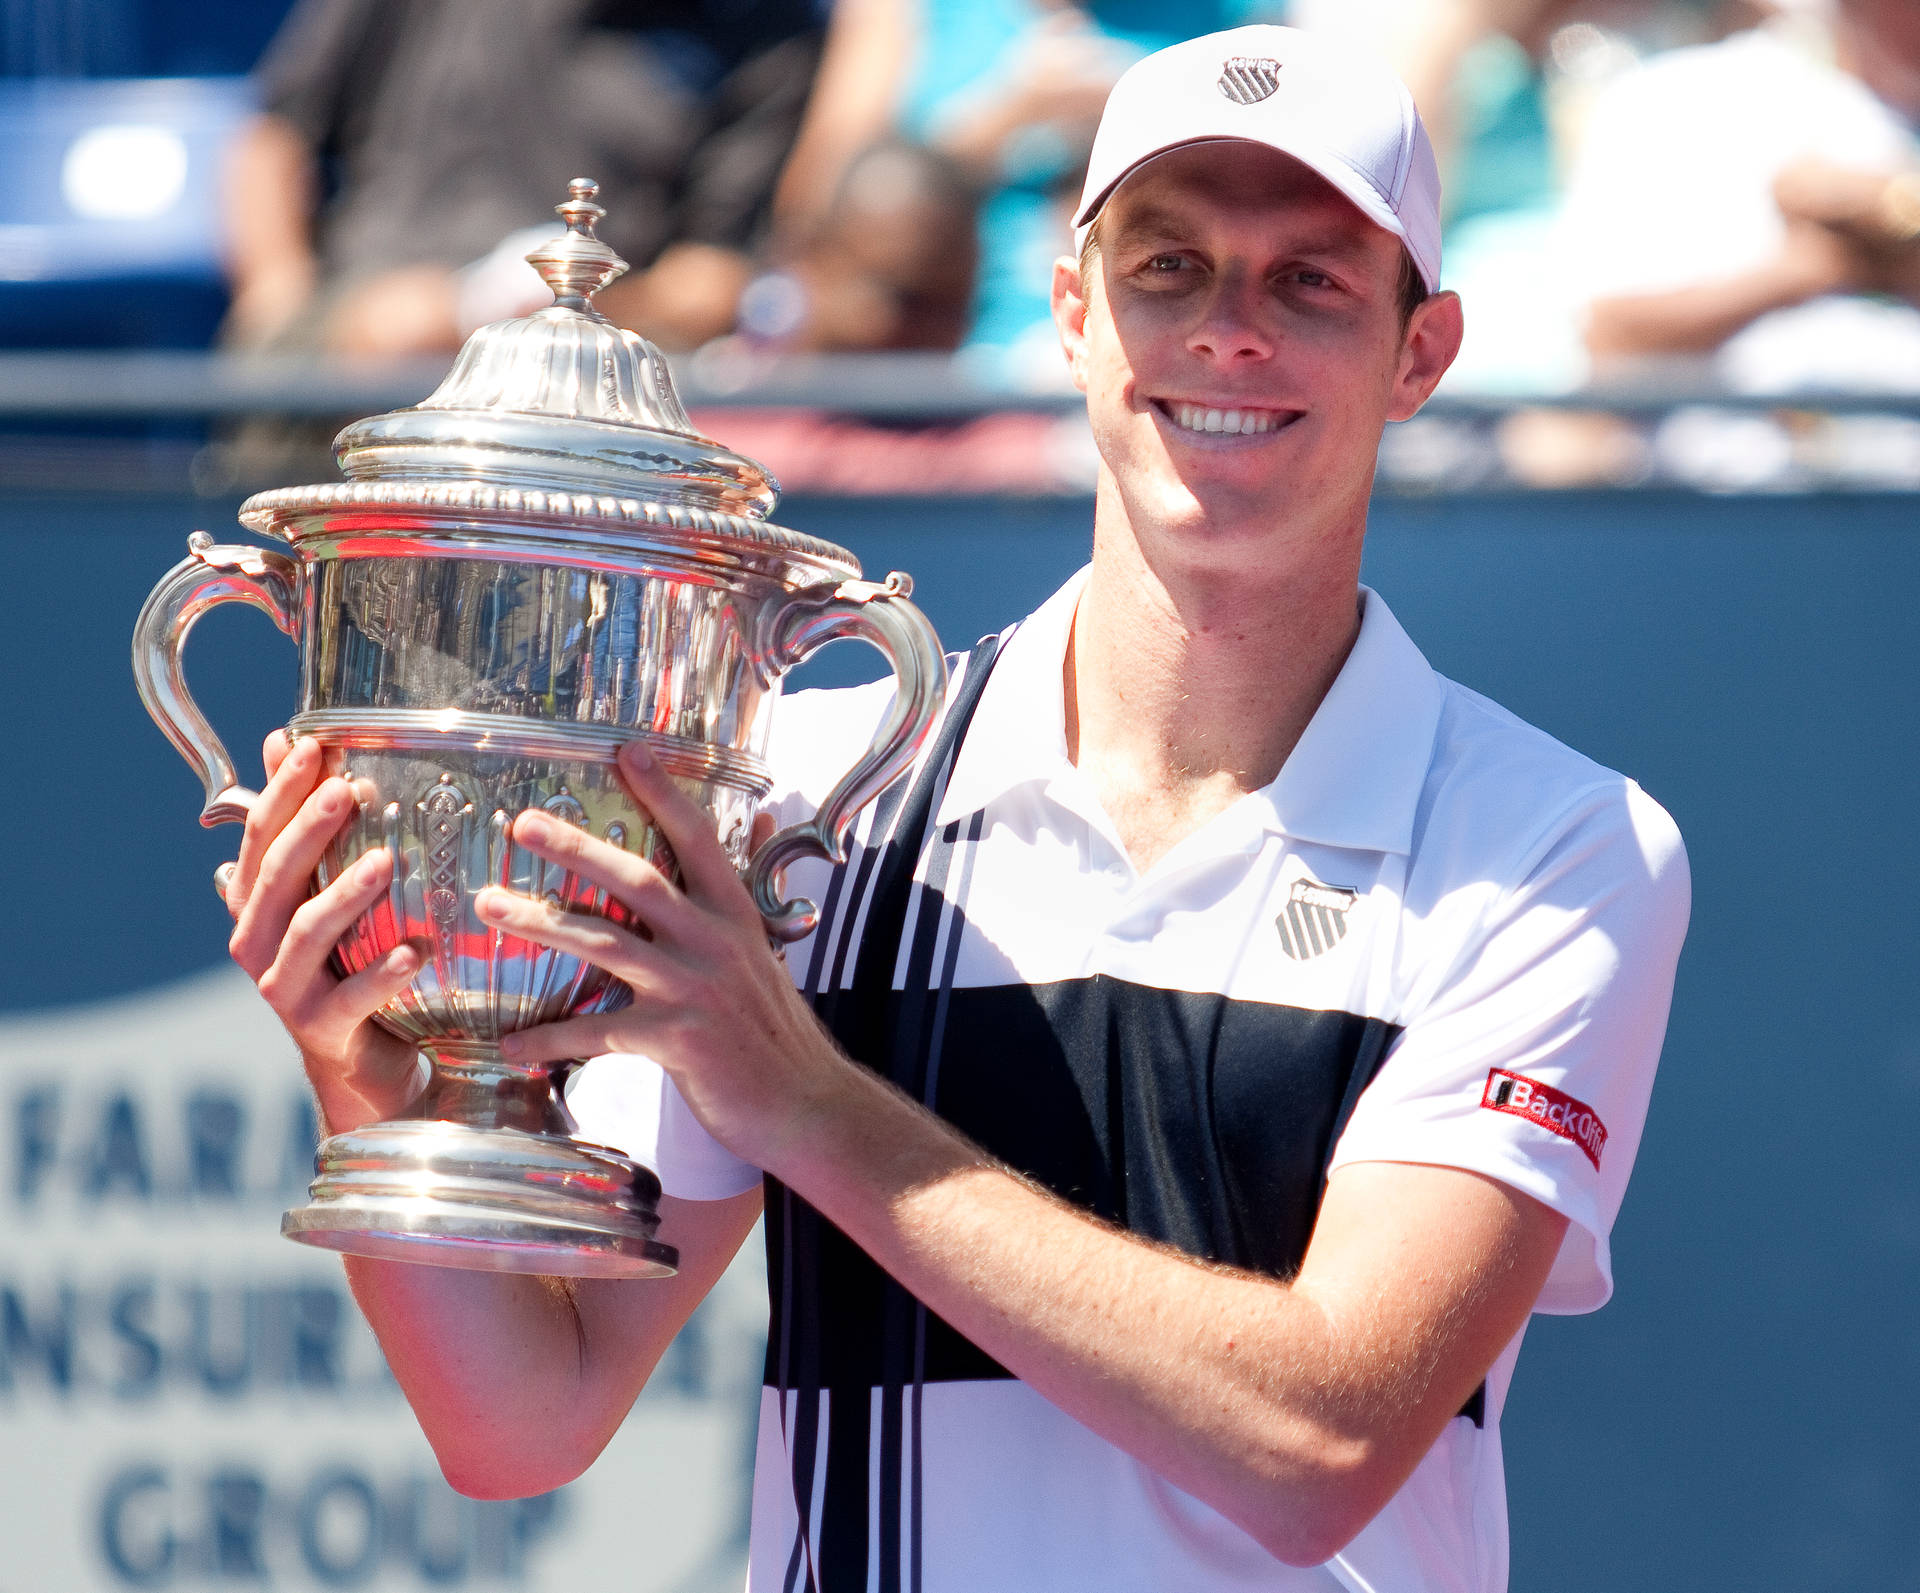 Samquerrey Com Troféu - This Would Be A Suitable Caption For A Computer Or Mobile Wallpaper Featuring A Photo Of Tennis Player Sam Querrey With A Trophy. Papel de Parede